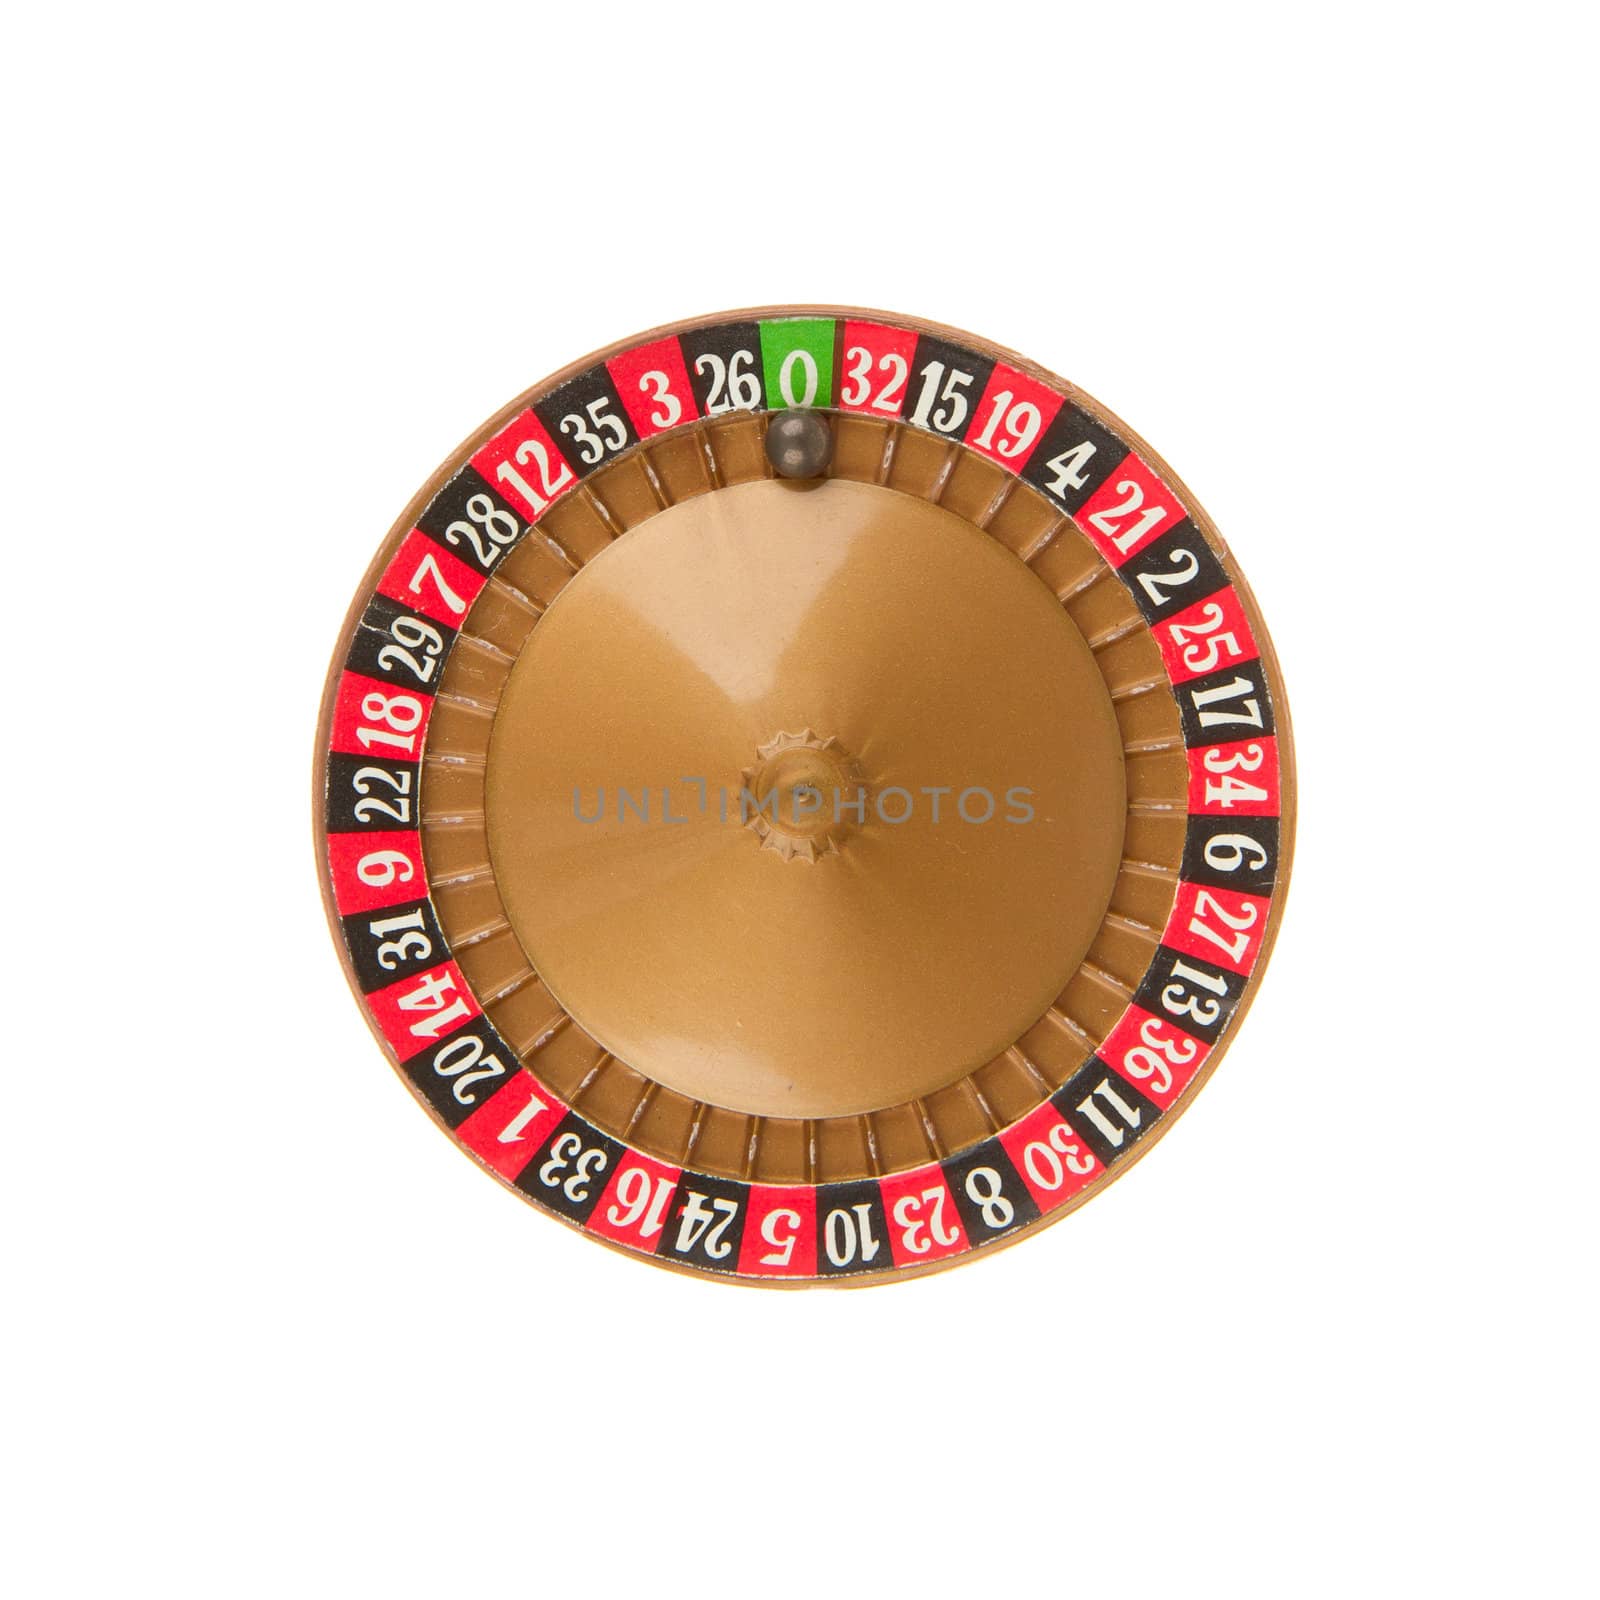 Used roulette wheel and ball by michaklootwijk